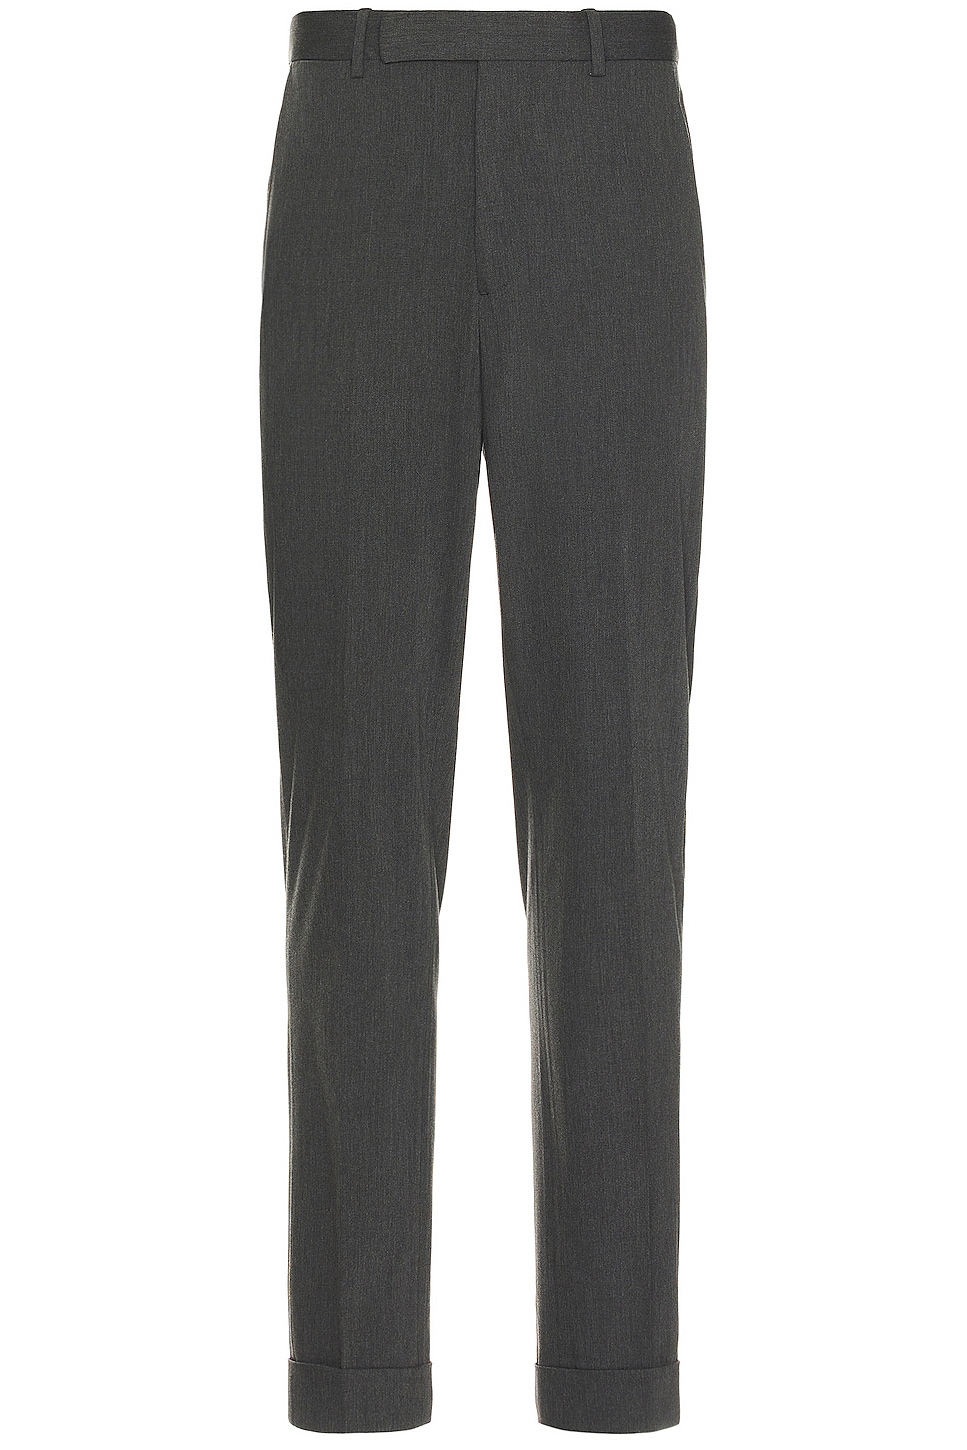 Image 1 of Polo Ralph Lauren Tailored Pant in Charcoal